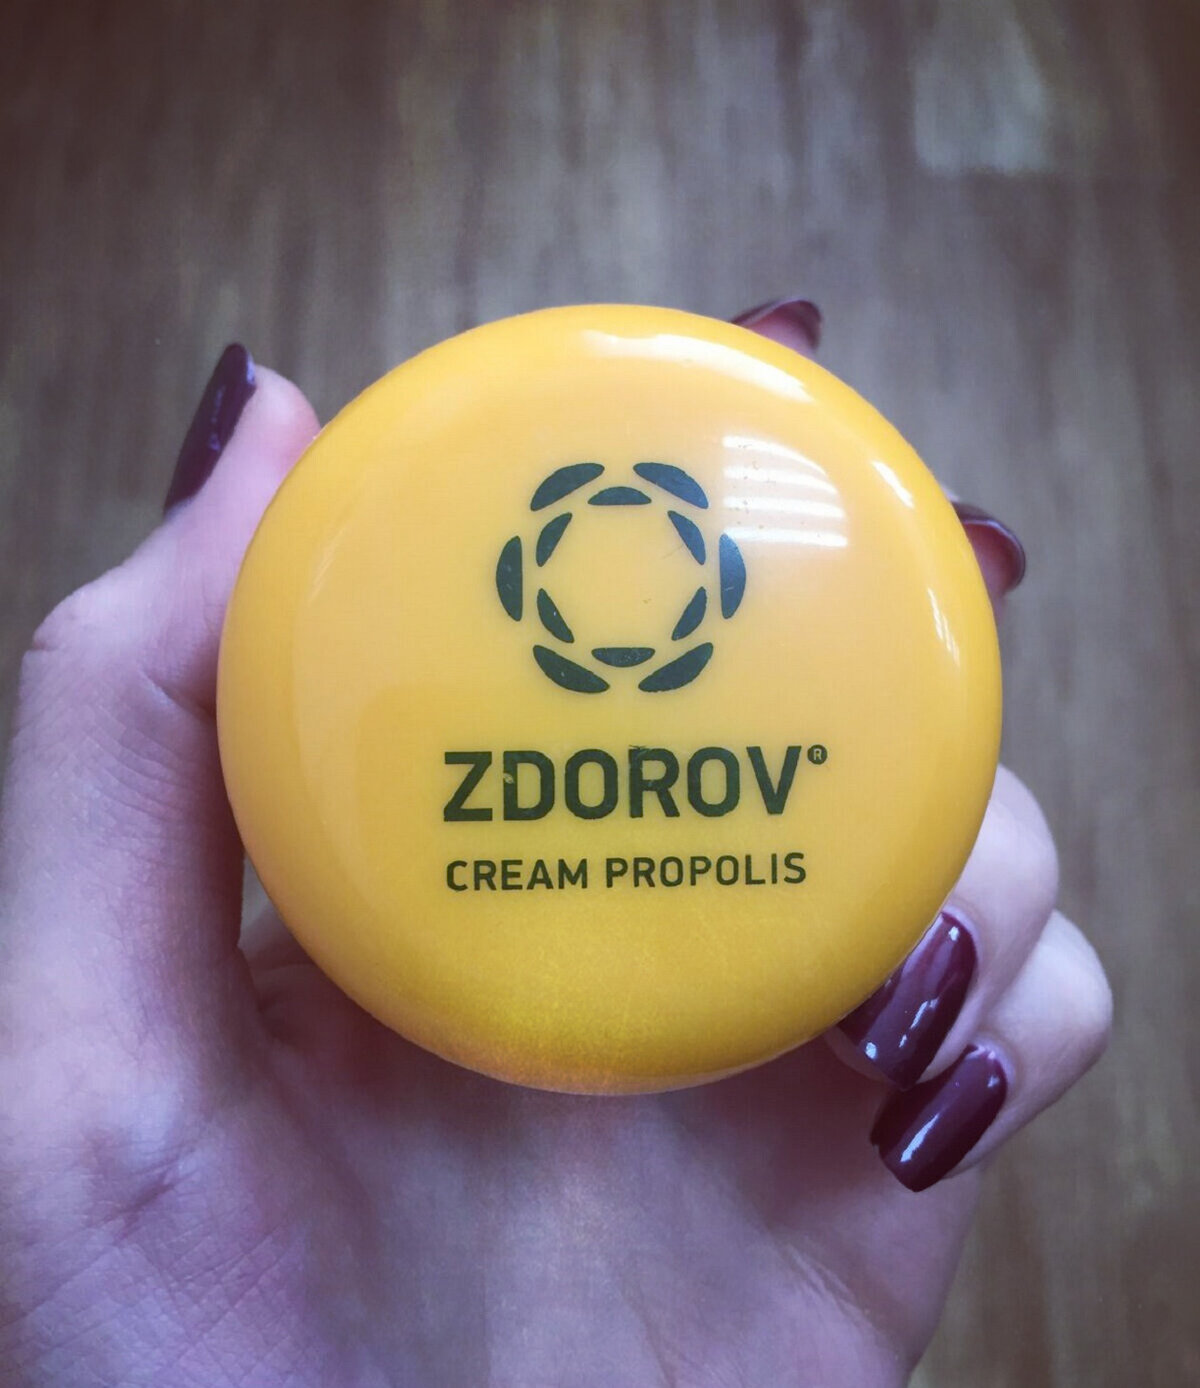 ZDOROV Propolis Cream - A unique cream that treats joints and ligaments
Get rid of joint pain cream to treat joint pain, arthritis and arthrosis - http://thebestleadbit.com/w7JV?sub1=ZdorovPropolisCream

• Removes inflammation, reddening and edemas
• Returns mobility of joints in 5-7 days
• Prevents salt deposition and development of osteochondrosis
• Restores cartilaginous tissue when arthritis or arthrosis
• Eliminates crunch in joints and in the back

Your hips and knees: they're the largest joints in your body, connecting a large number of muscles, bones and ligaments. That means that much of the daily ... Other injuries sustained in the fall; I only have a few scratches on my ... Review of systems specific to knee pain and leg pain and swelling. Whether your knee pain is a result of arthritis or a temporary injury, there are steps ... help cushion the joint, and allow the ligaments and tendons to slide smothly ... Orthopaedic surgeons at Salt Lake Orthopaedic Clinic perform knee procedures and surgeries, including total knee replacement and knee arthroscopy in Salt ... However while knee pain from injury is acute (sudden), often settling ... It does not heal or regenerate, unlike the ligaments and bones affected ... Since my husband and I are older, it eases pain in the joints, muscles, spine. ... when there is still a slight pain during weather changes or during a lot of strain.  One group of researchers found that changes in barometric pressure and ambient temperature correlate with the severity of arthritic knee pain. Another study ...